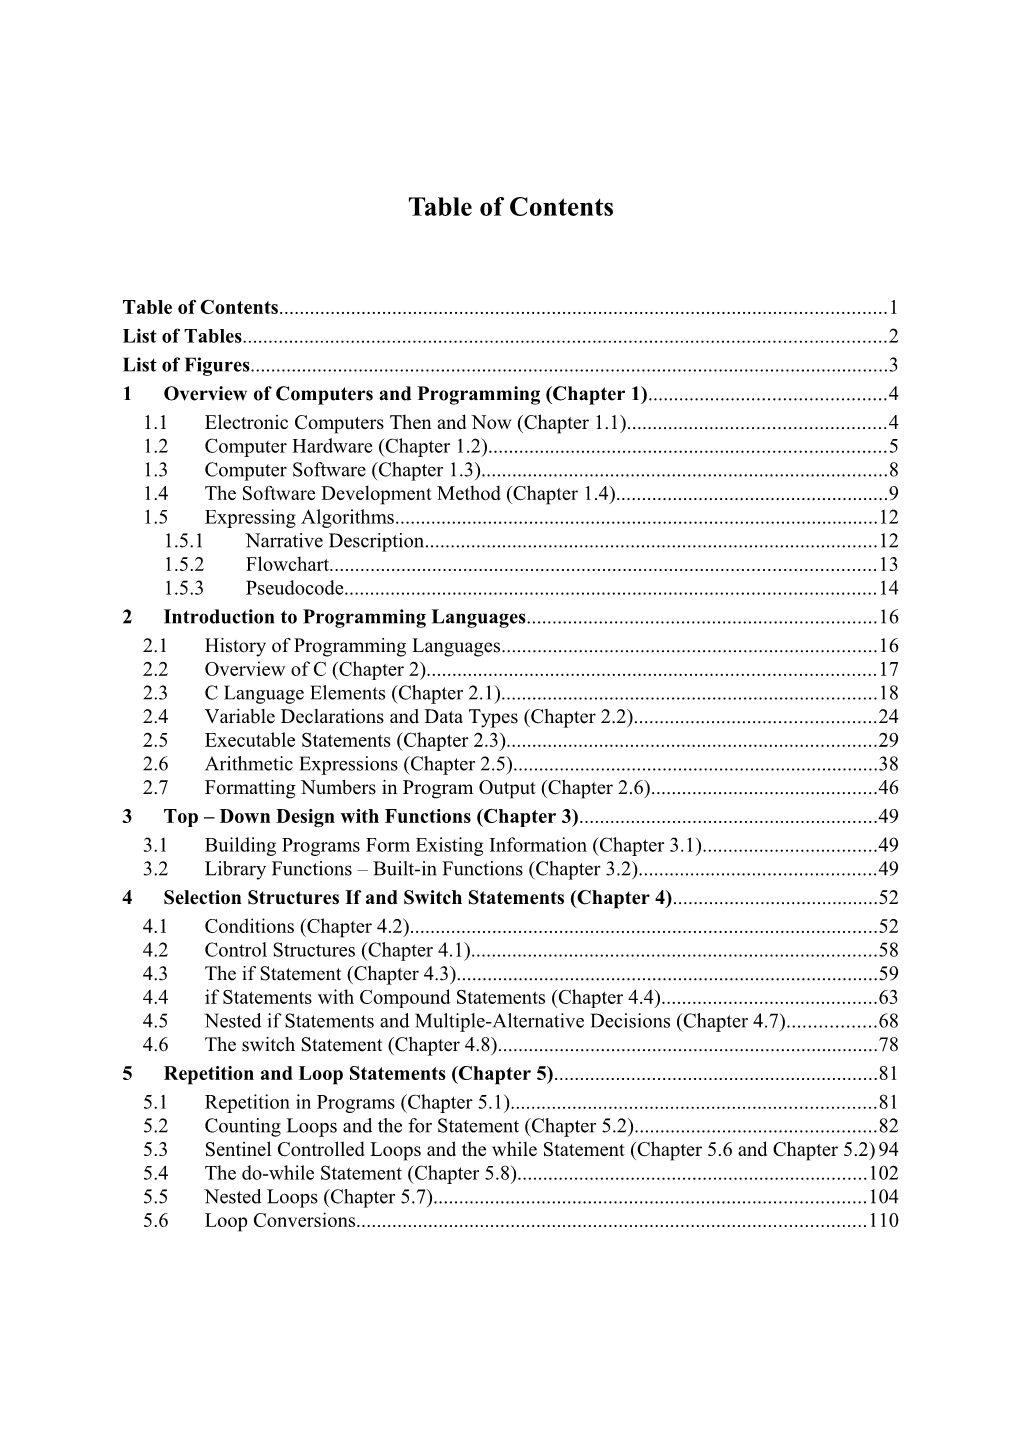 Table of Contents s159